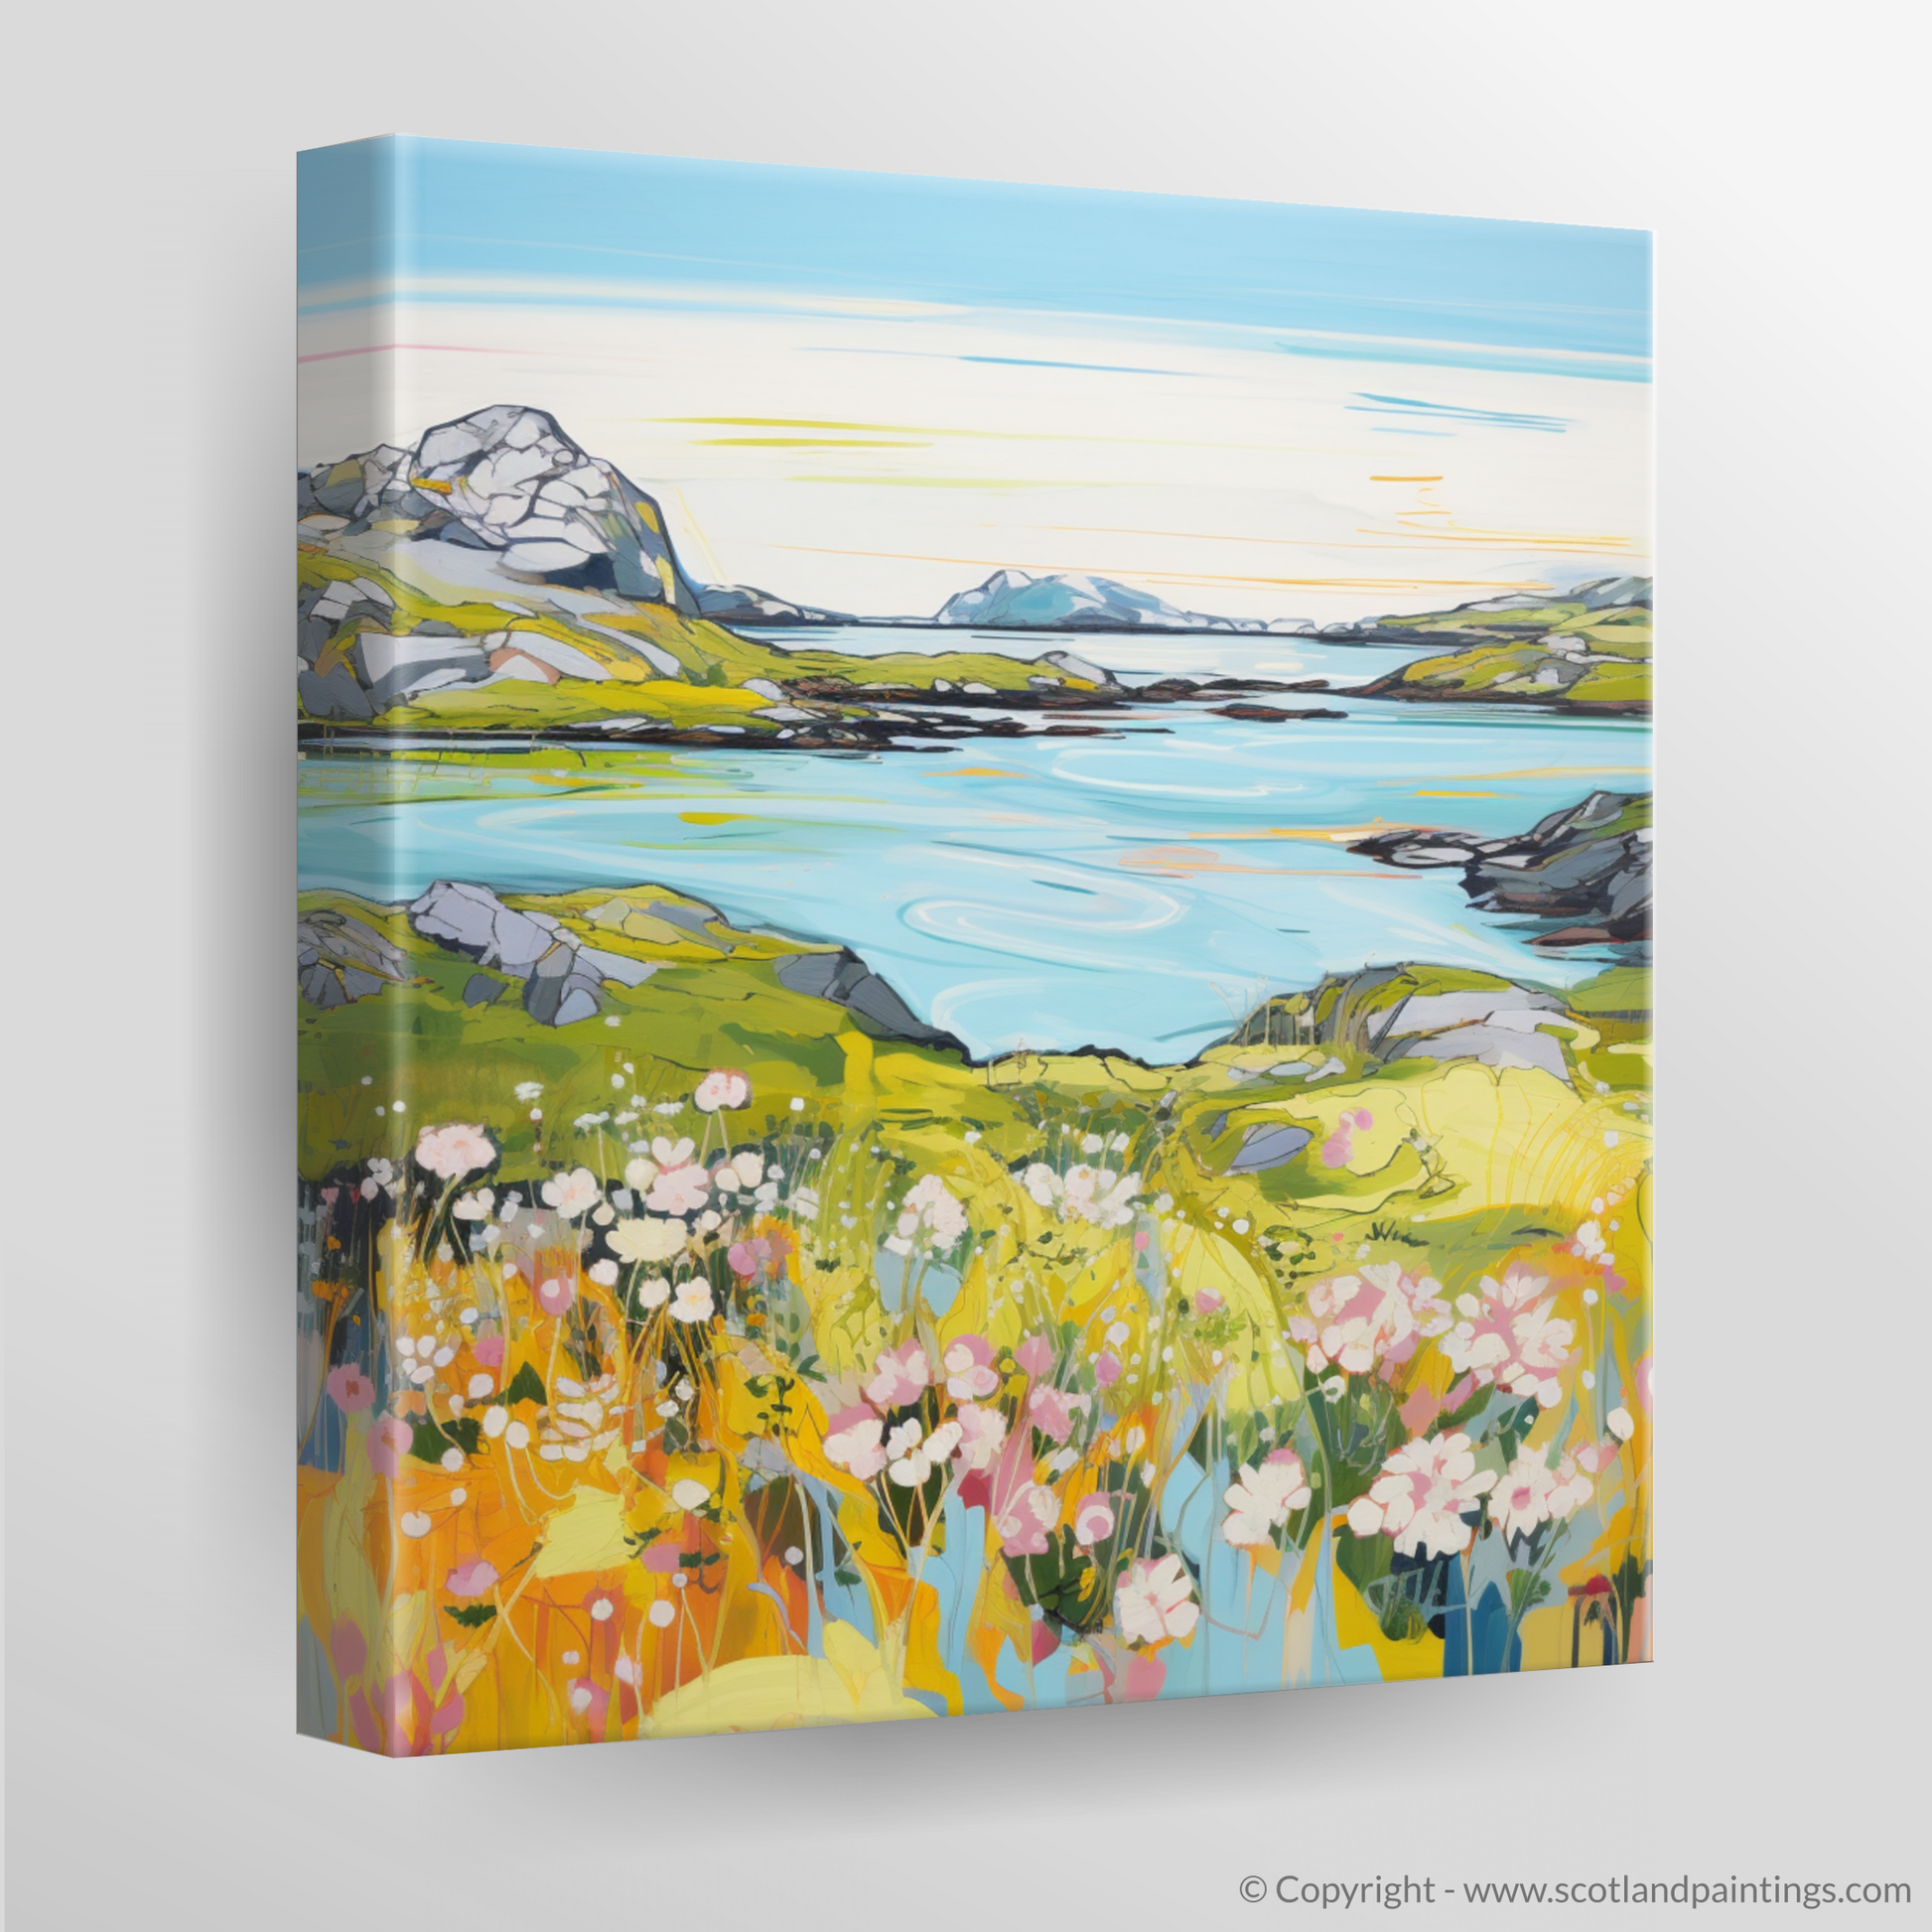 Canvas Print of Isle of Scalpay, Outer Hebrides in summer